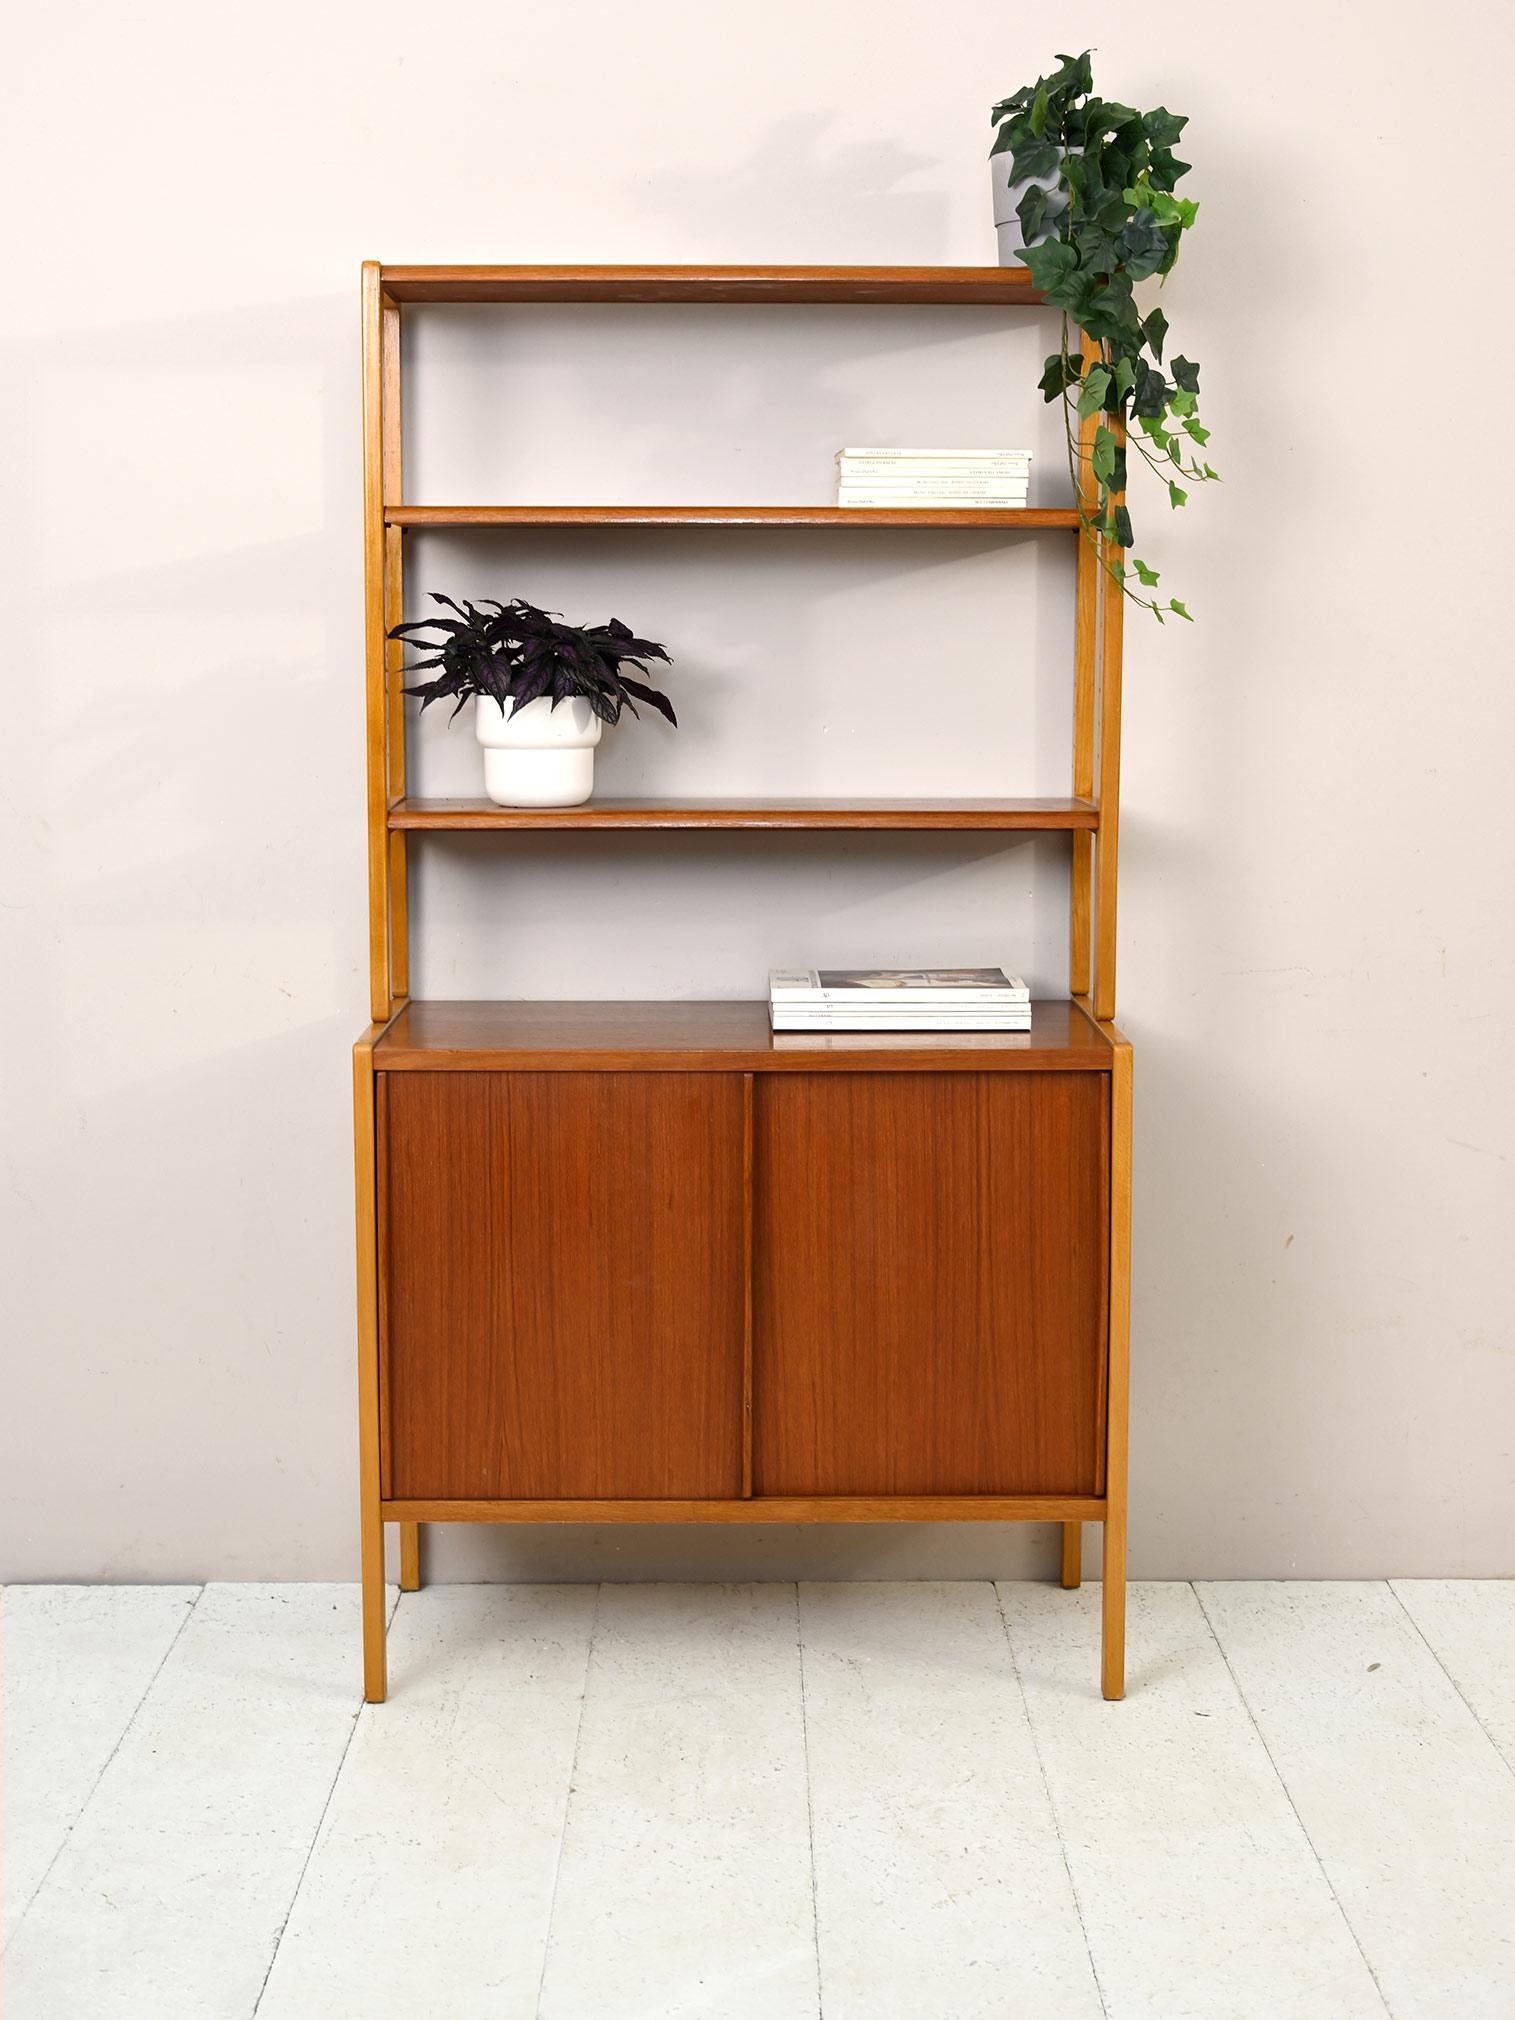 Original Scandinavian teak cabinet consisting of two parts.
The upper part is a bookcase equipped with adjustable height shelves, the lower part is a storage cabinet with sliding doors. 
Despite its small size it turns out to be practical and